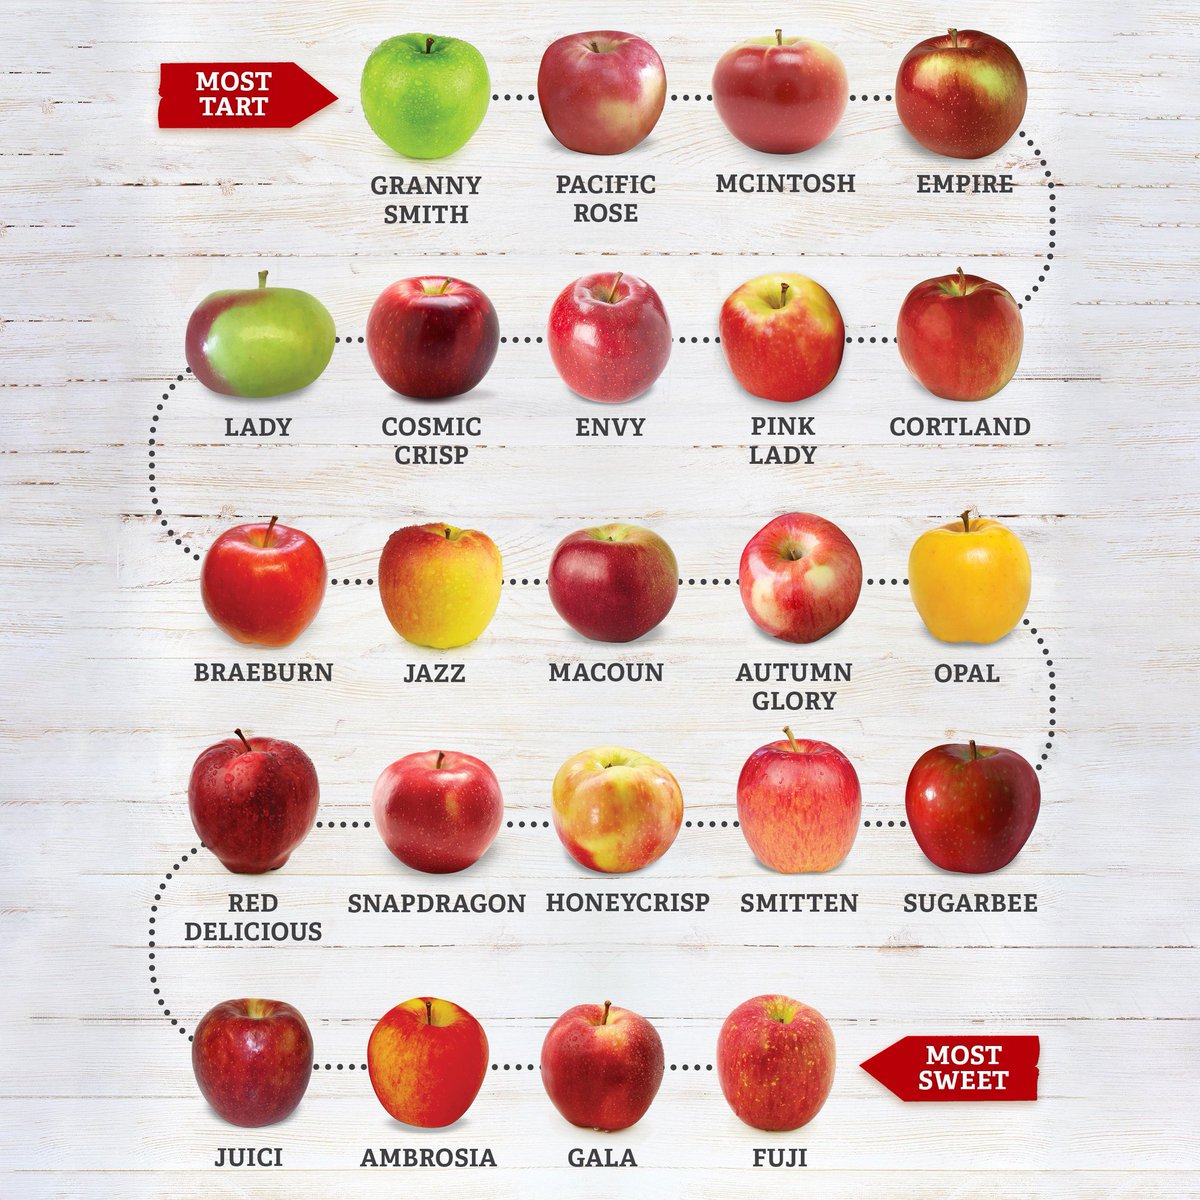 There are 7,500 varieties of apples in existence throughout the world but here are the most common varieties you’d likely see on markets sorted from the most tart to the sweetest. 🍏🍎

#dxblife #UAE
#mydubailife #DubaiLife #dxb 
#MyDubai #Alaweerfruitandvegetablemarket 
#Dubai